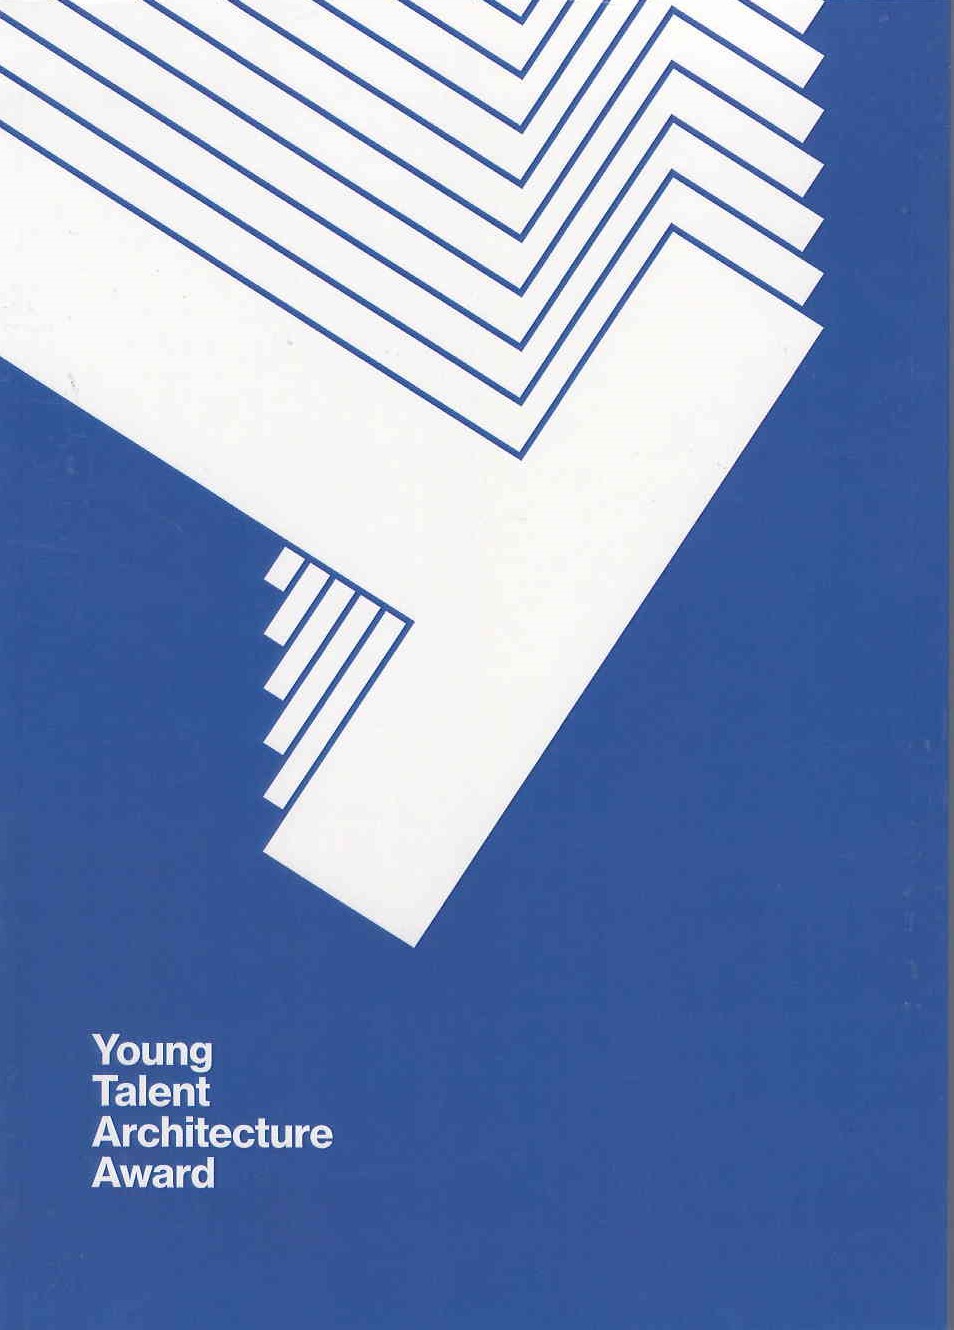 Young talent architecture award : 2020